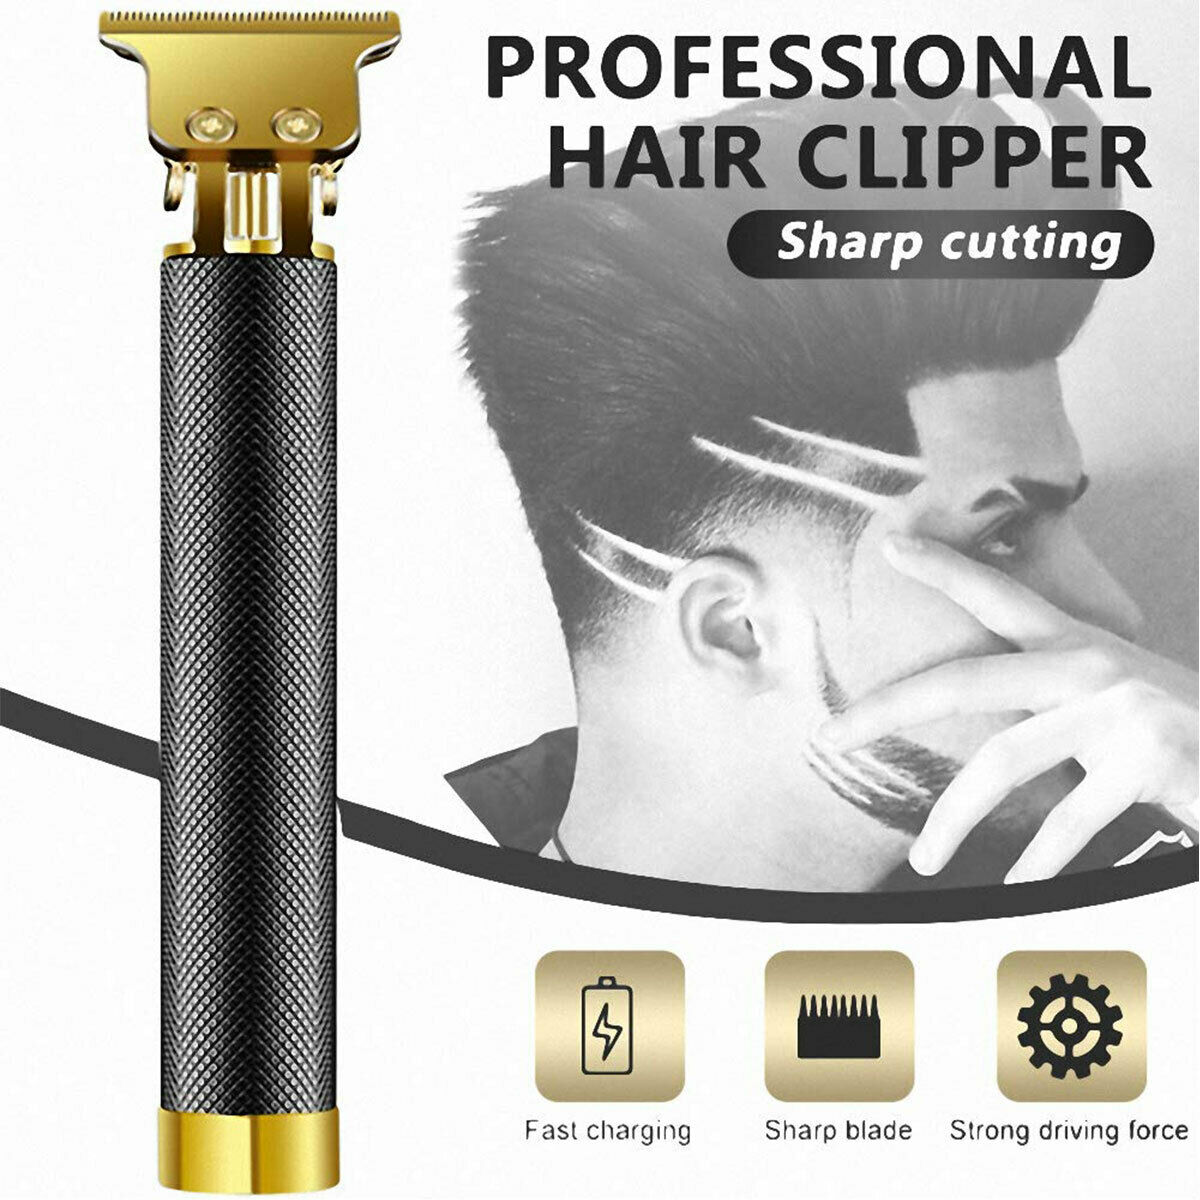 Professional Electric Mens Hair Clippers Shaver Trimmers Machine Cordless Beard